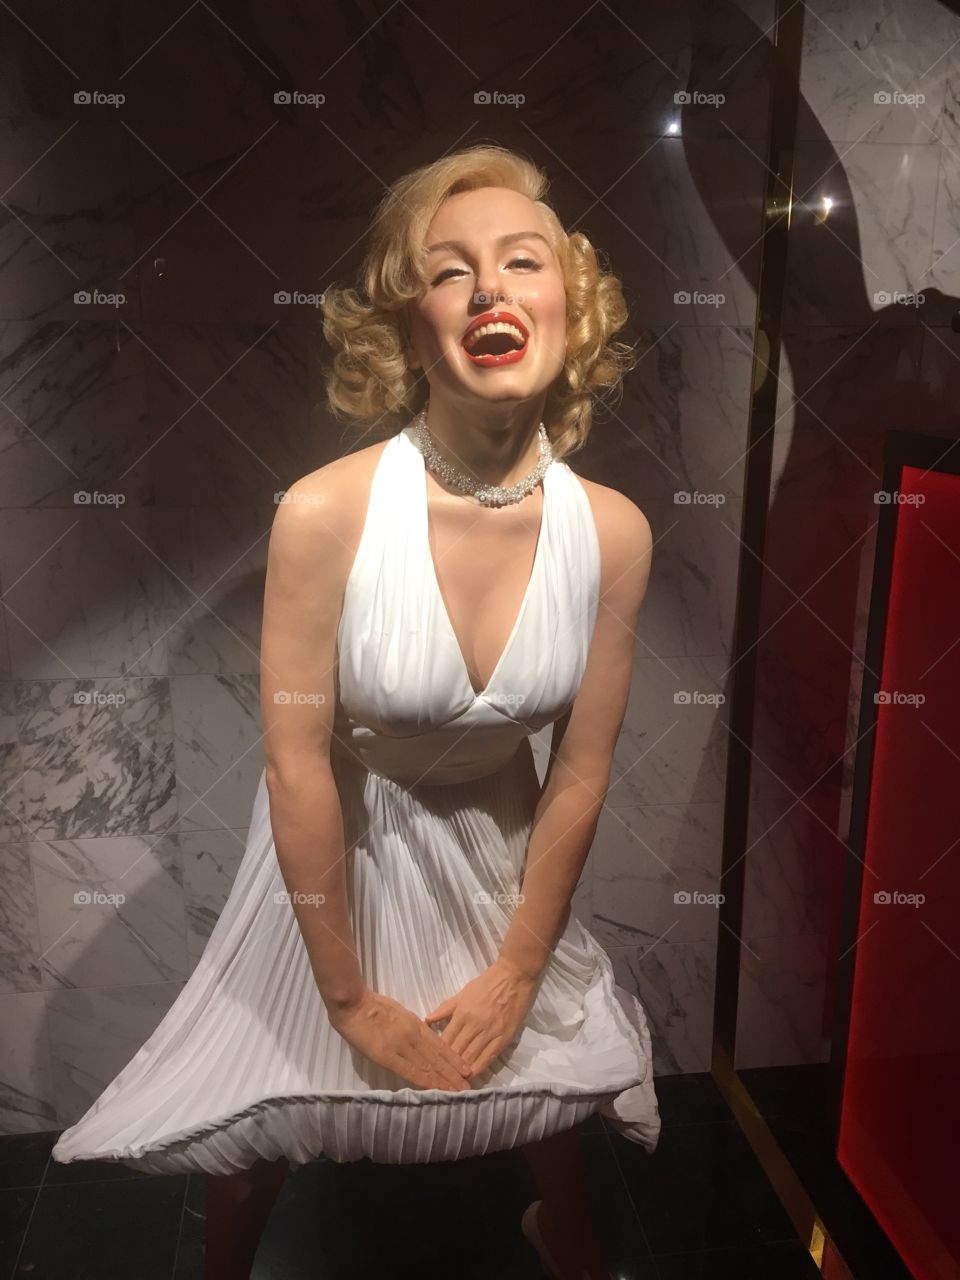 Marilyn Monroe wax museum got woman classic reproduction blonde movie actress diva vintage